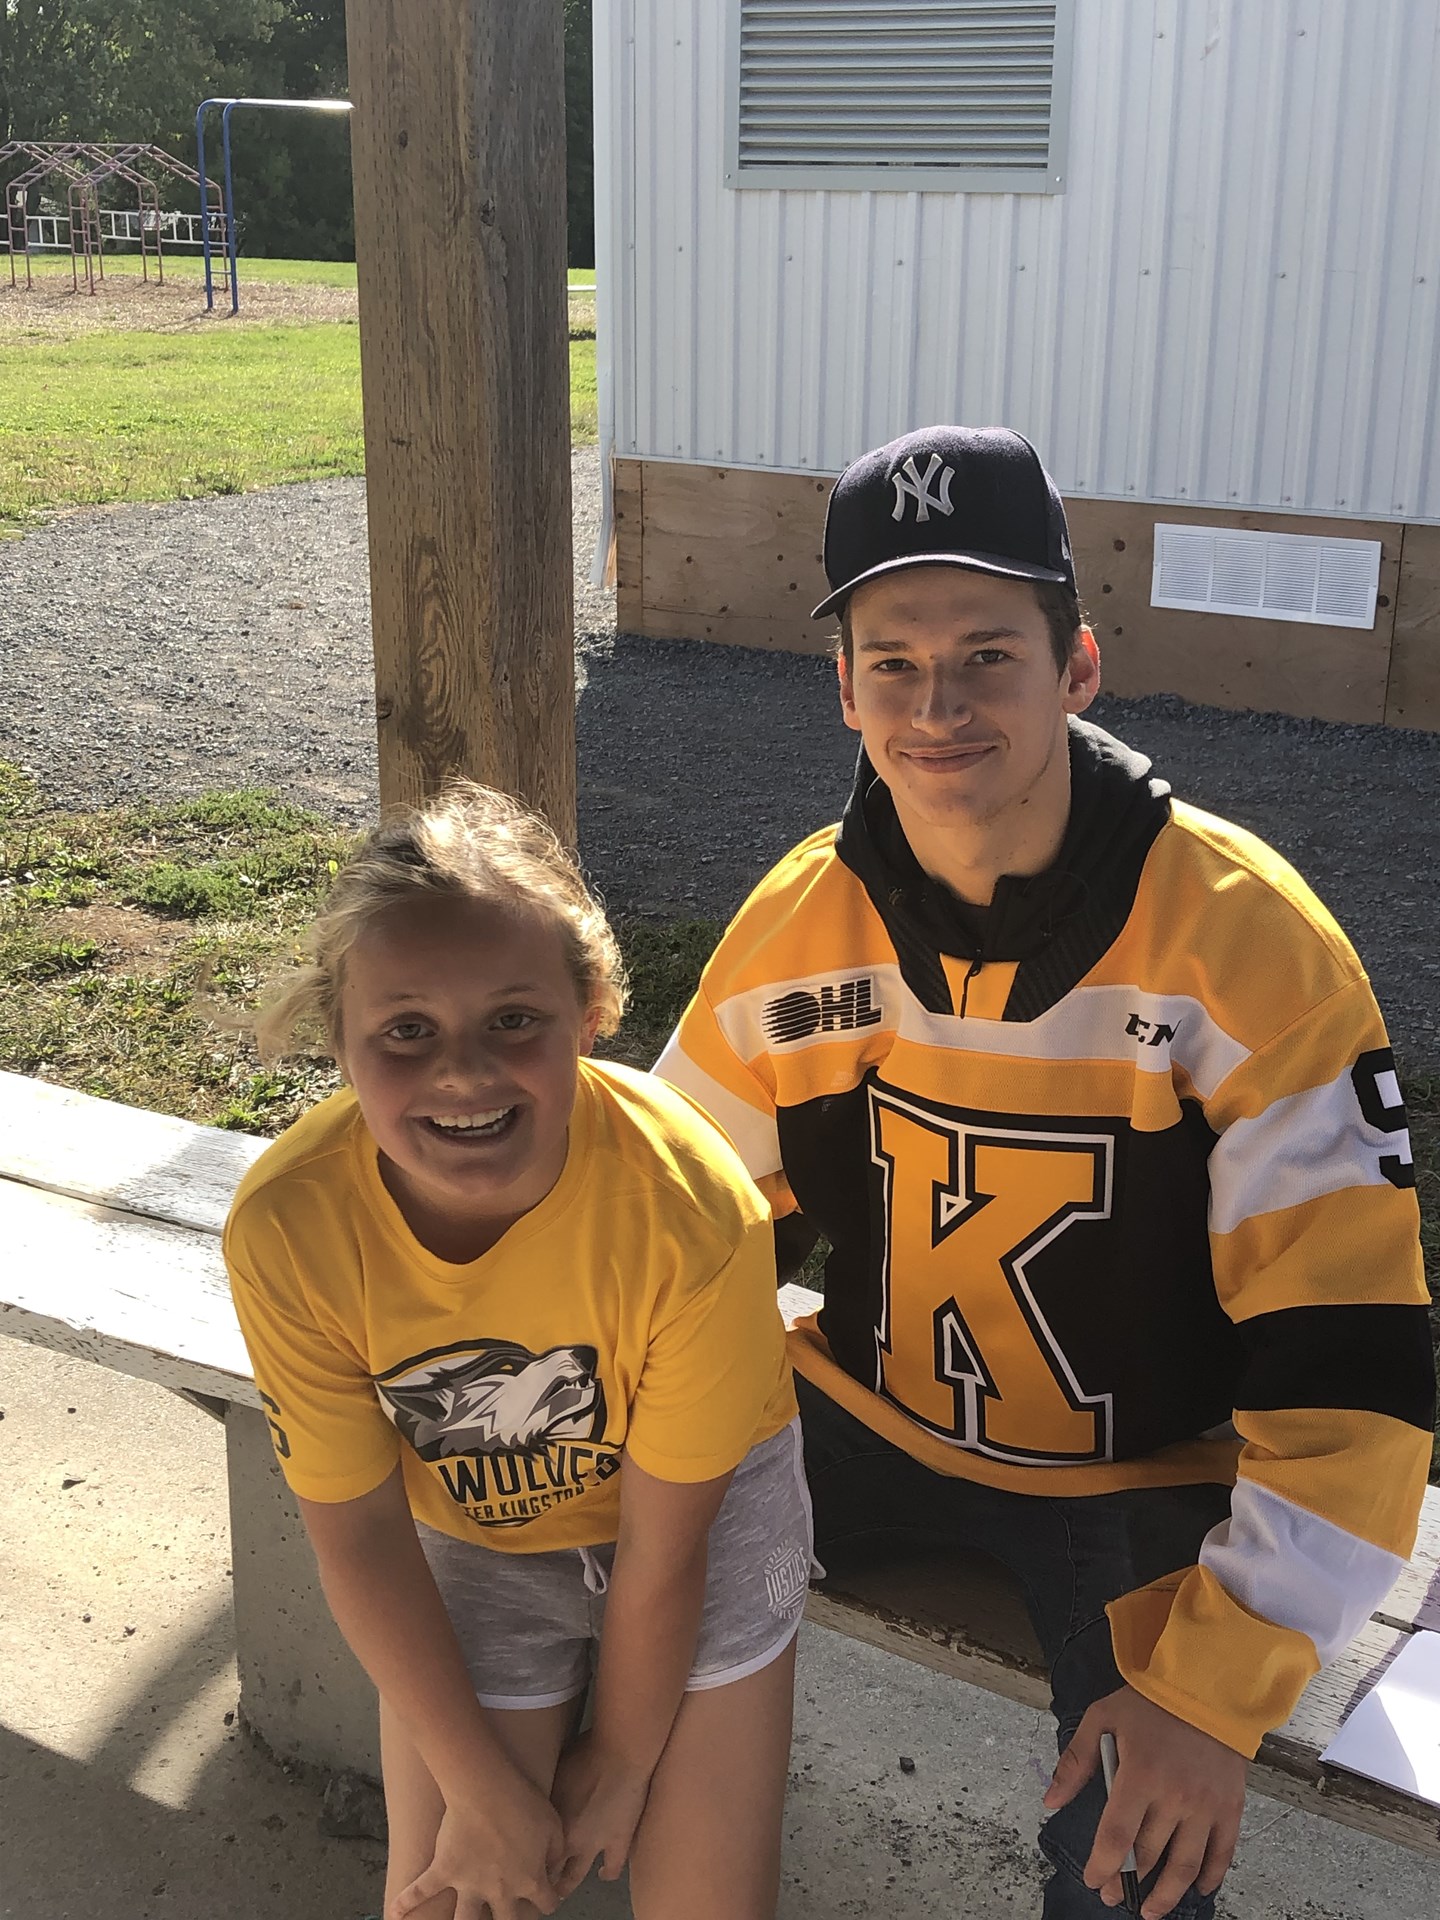 Kingston Frontenacs player sitting with student.